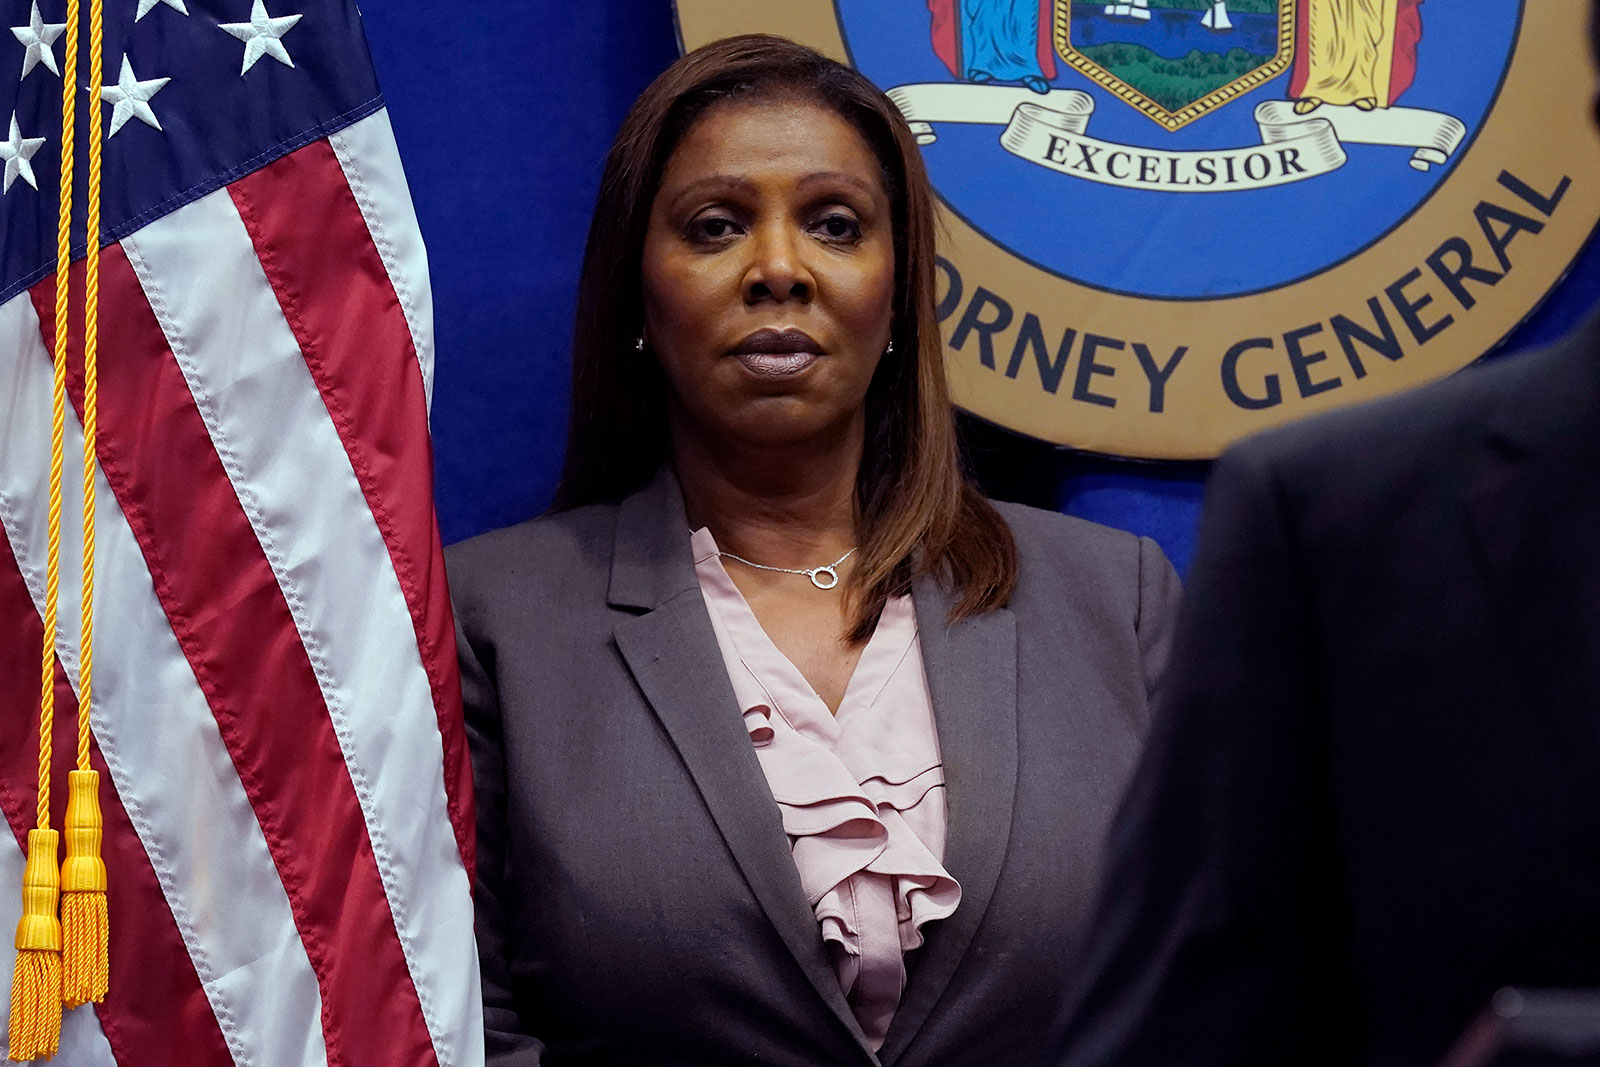 New York Attorney General Letitia James looks on during a press conference in New York on May 21.